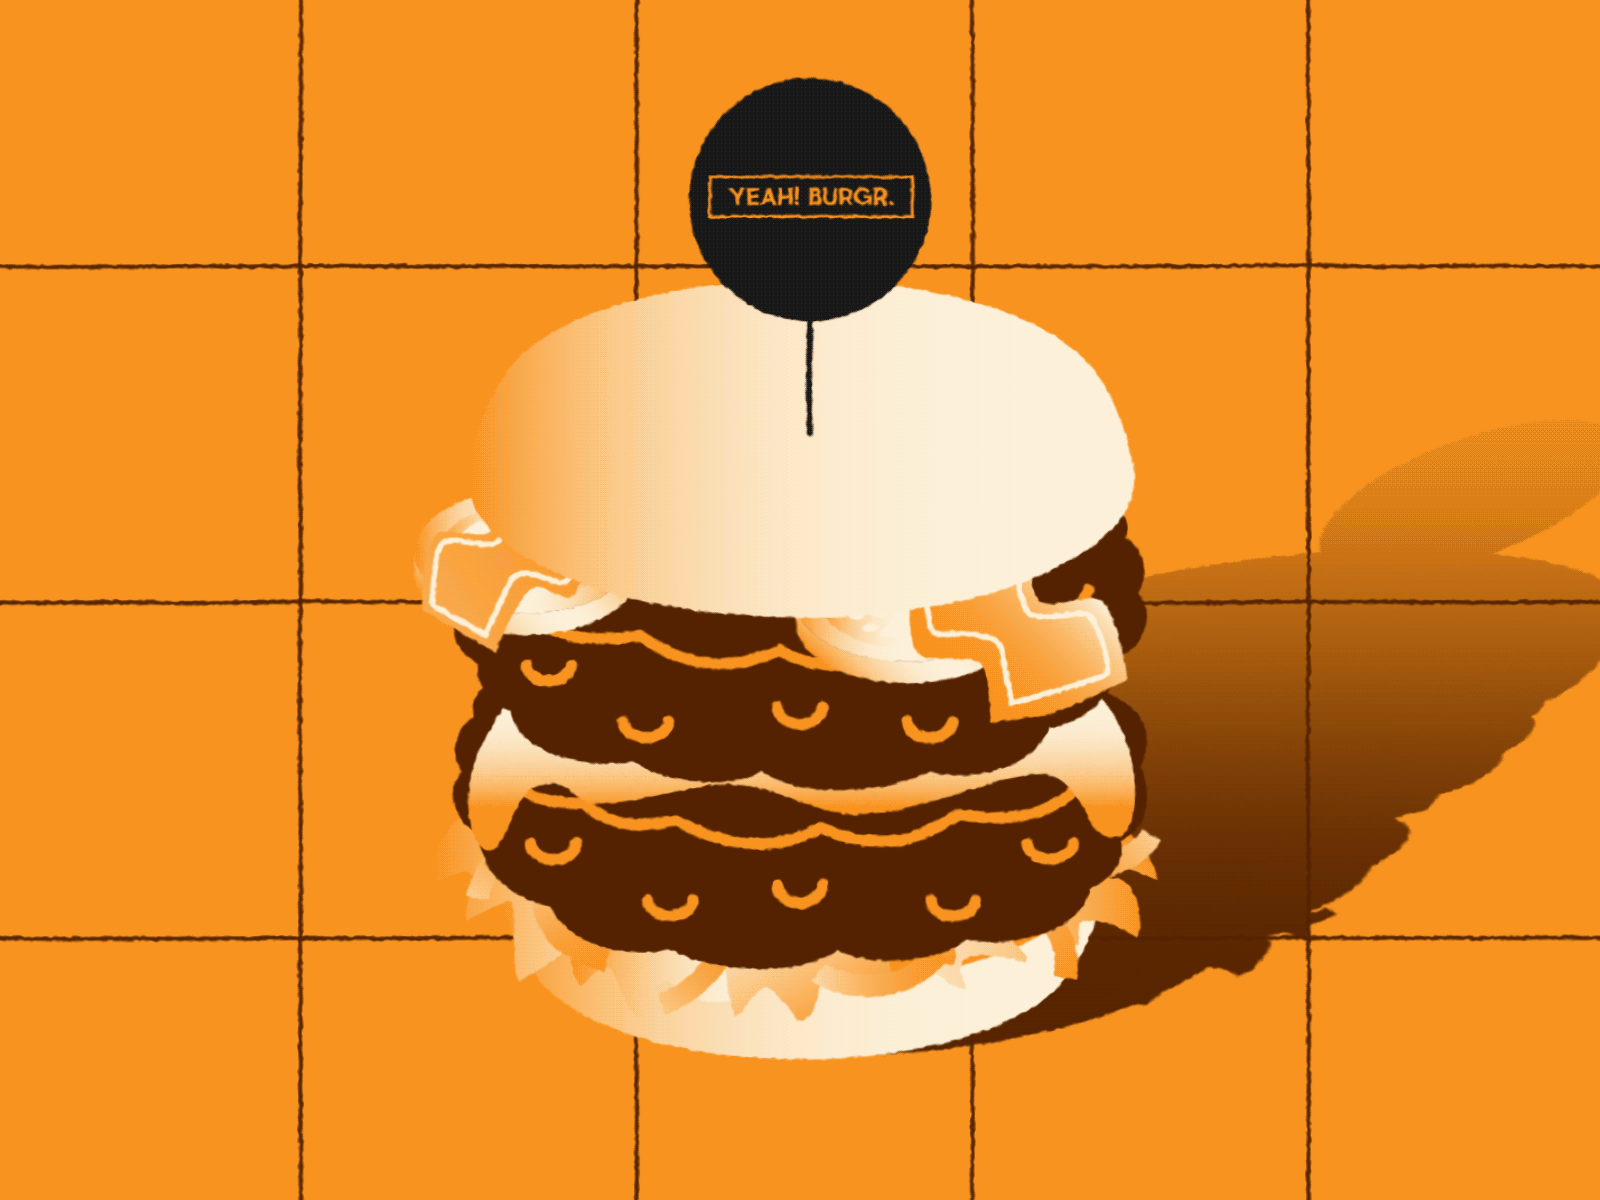 Burger Stack 2d after affects animated gif animation burger fast food illustration stack texture toppings